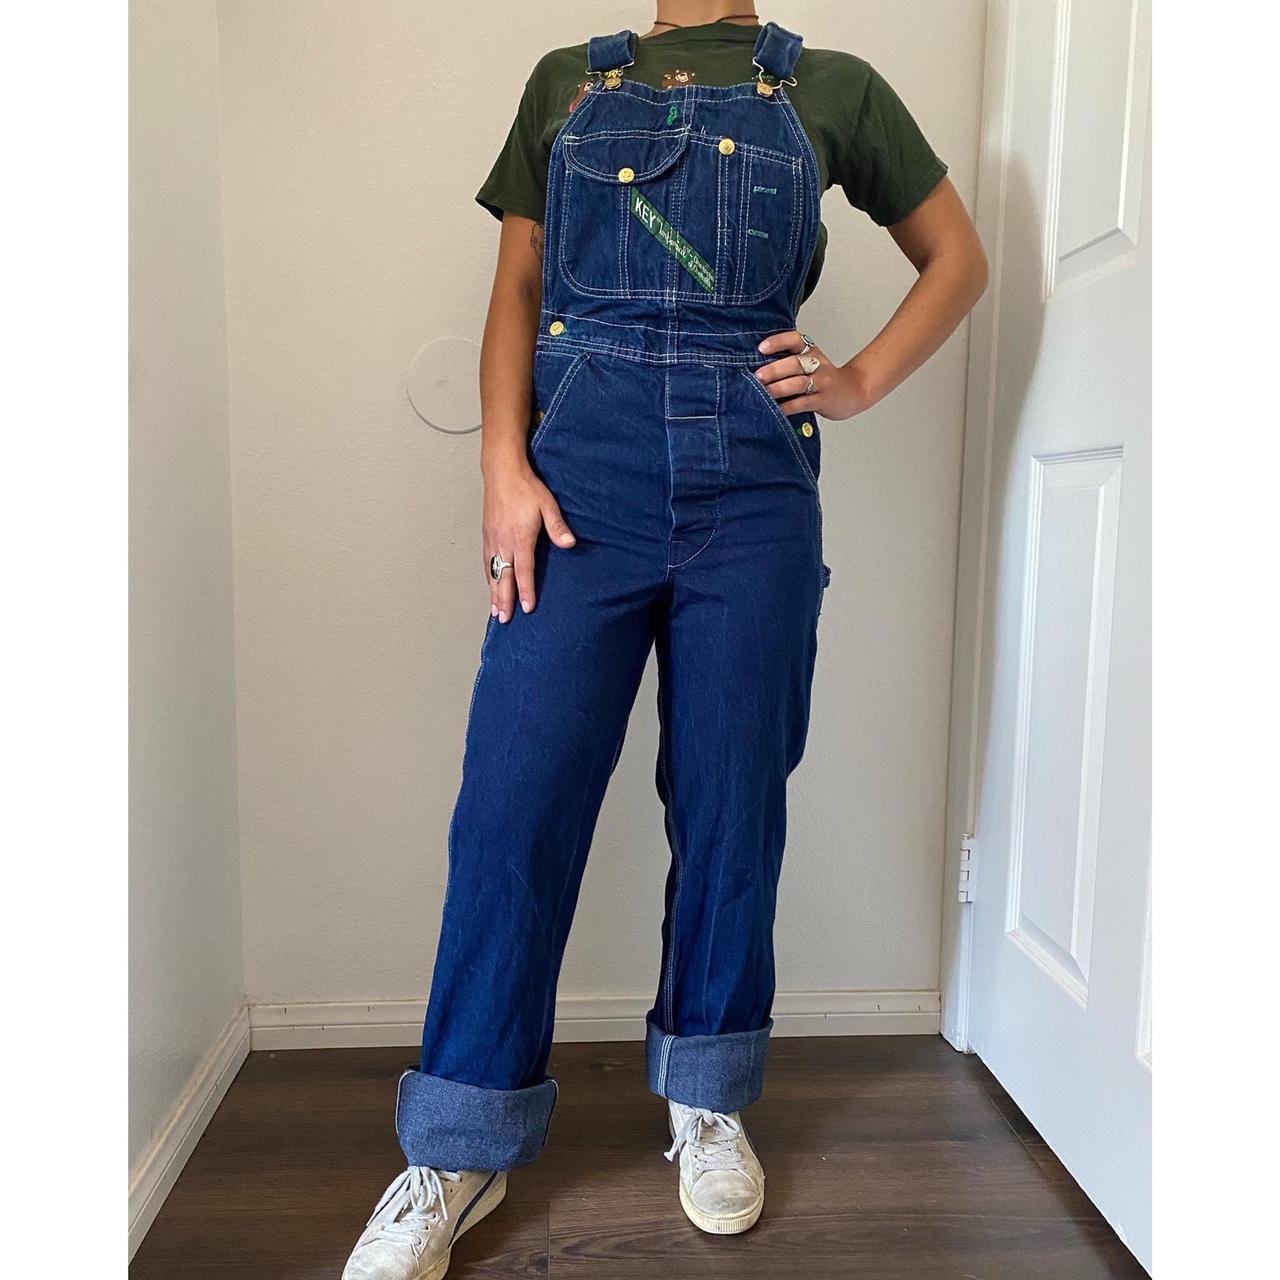 Vintage Key Overalls! Perfect blue wash with green... - Depop